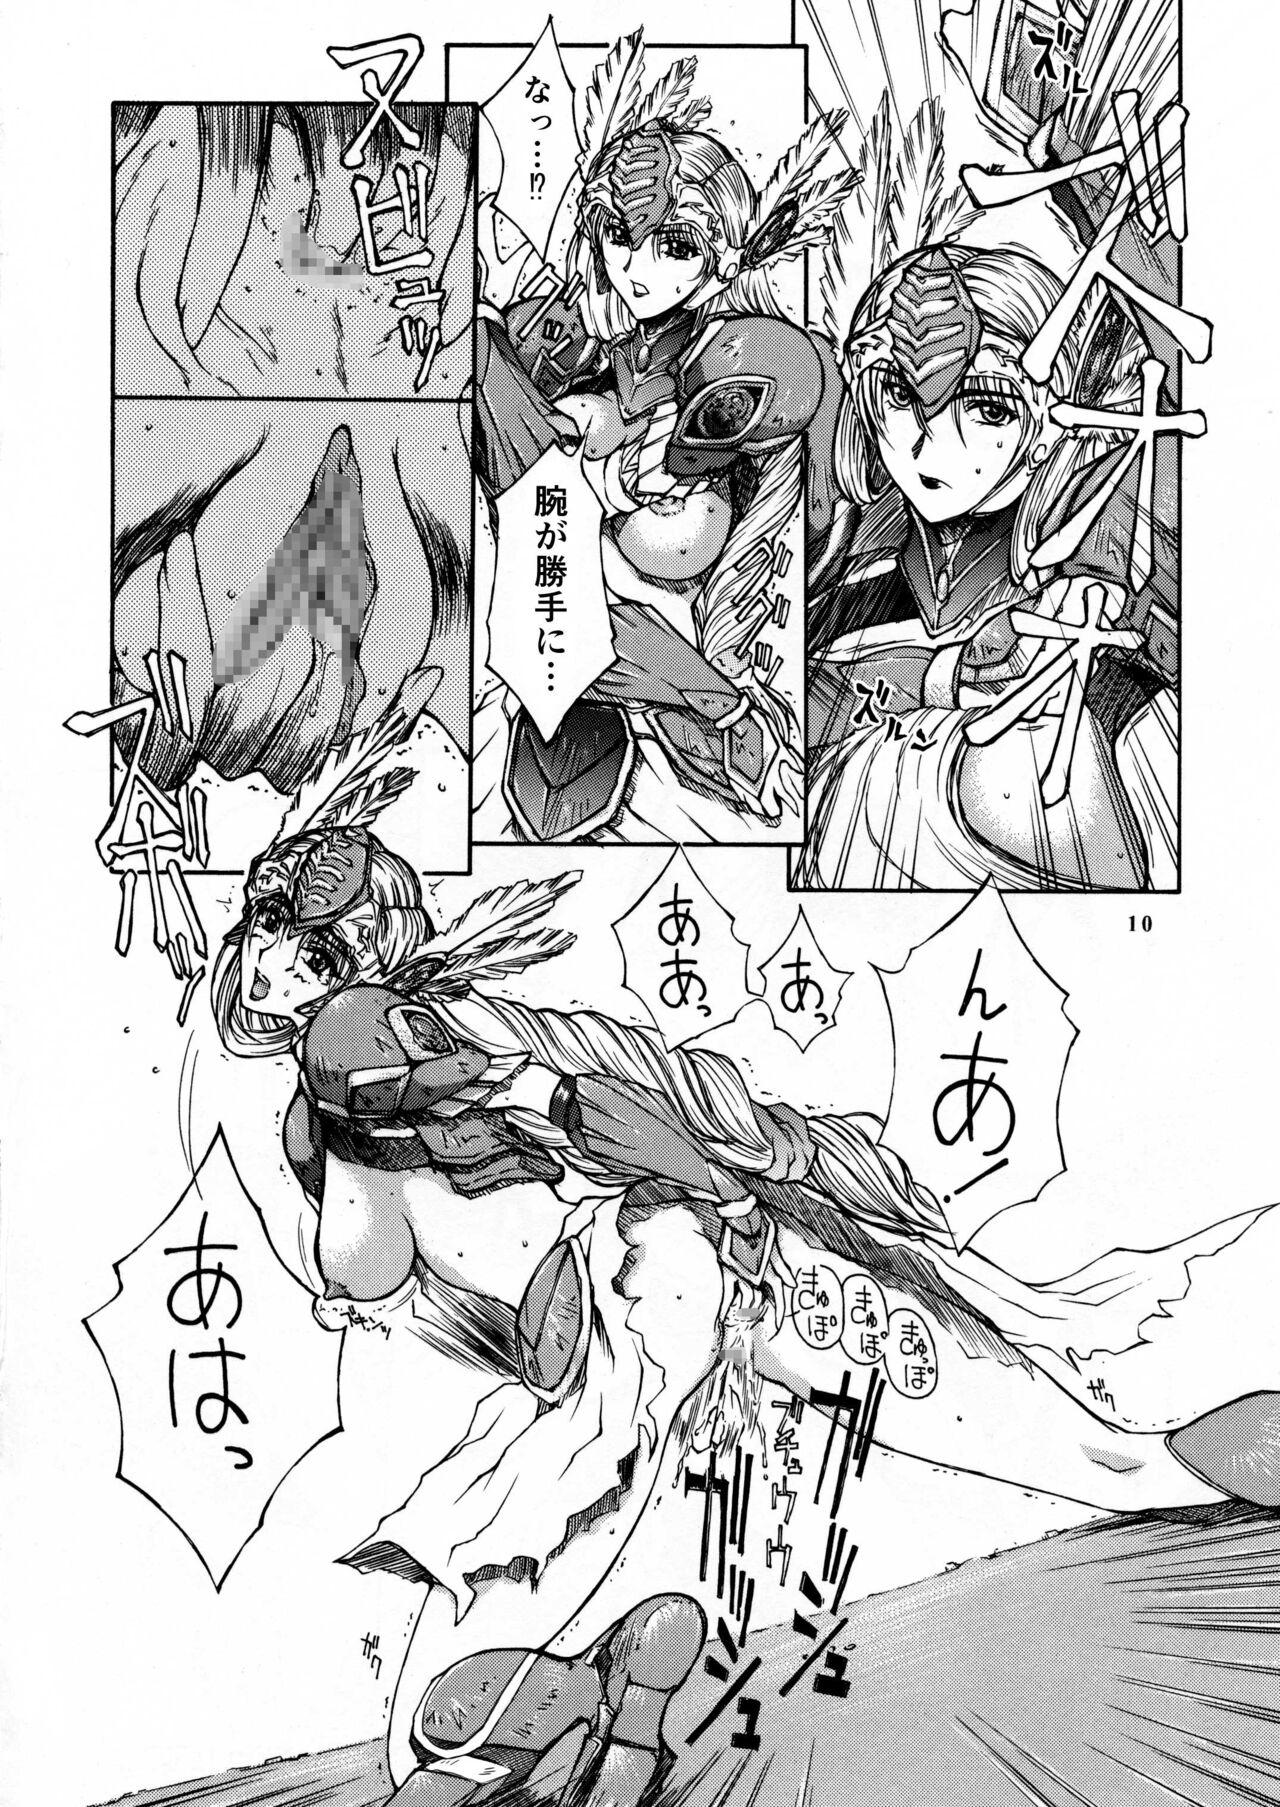 Boy Leathered Castle - Valkyrie profile Couple - Page 7